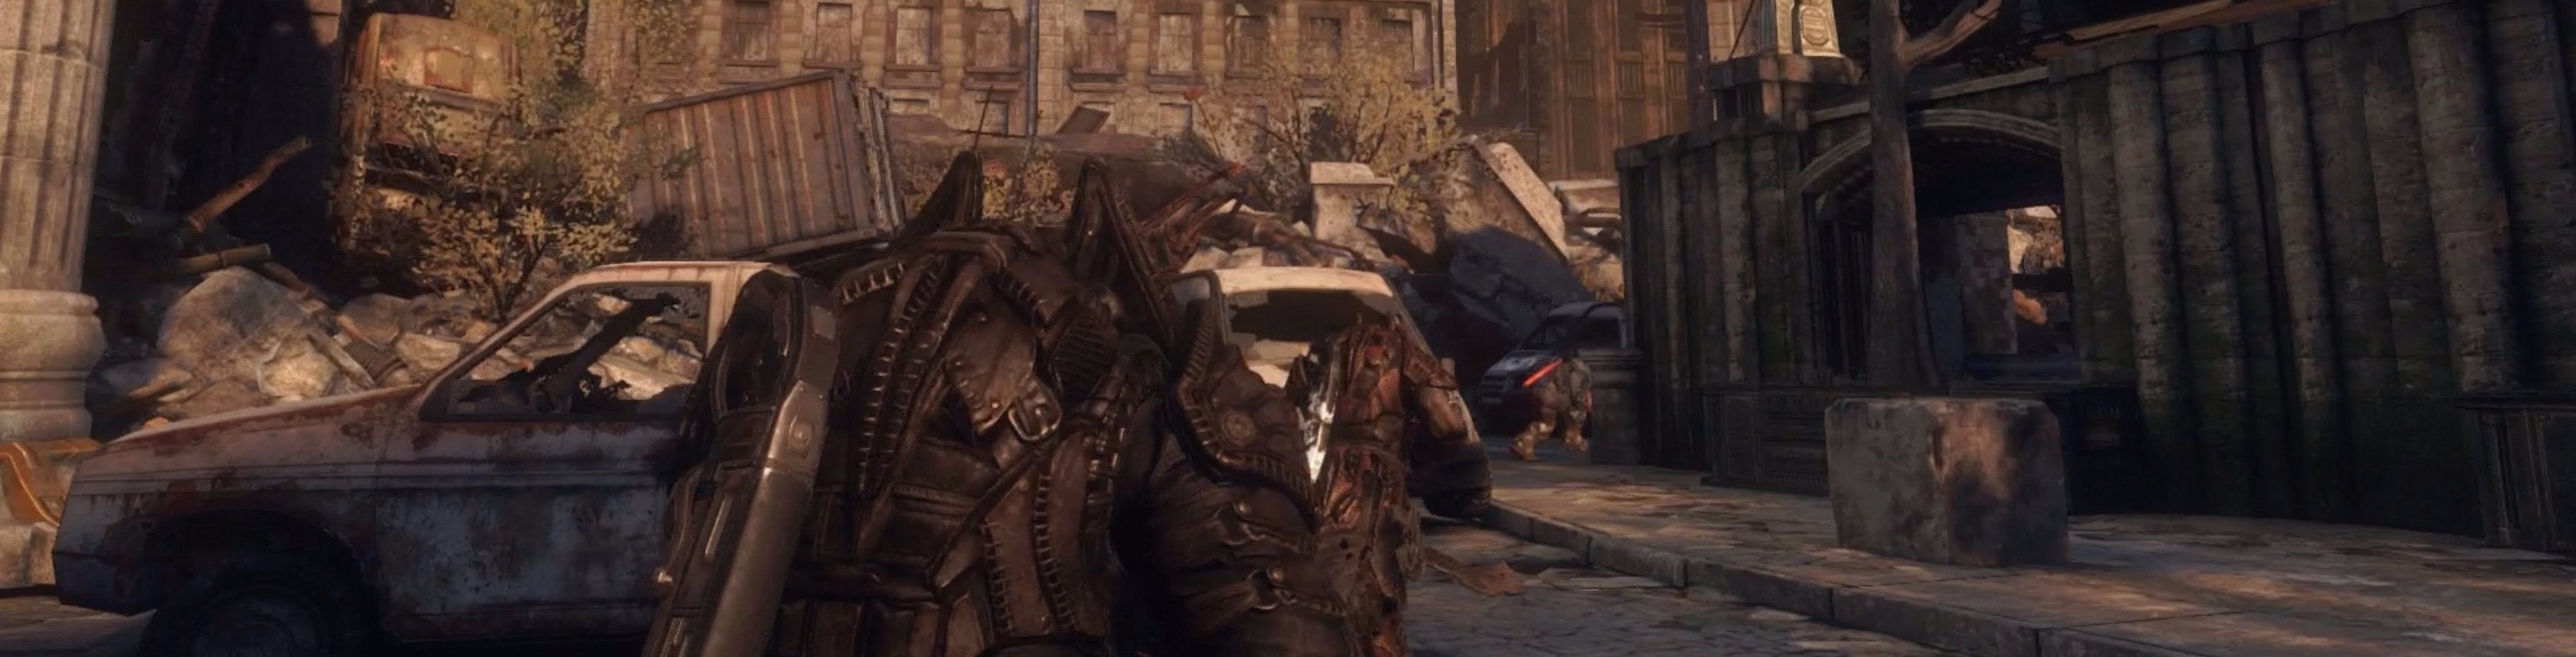 Image for Video: Ian plays Gears of War: Ultimate Edition's multiplayer, is once again rusty